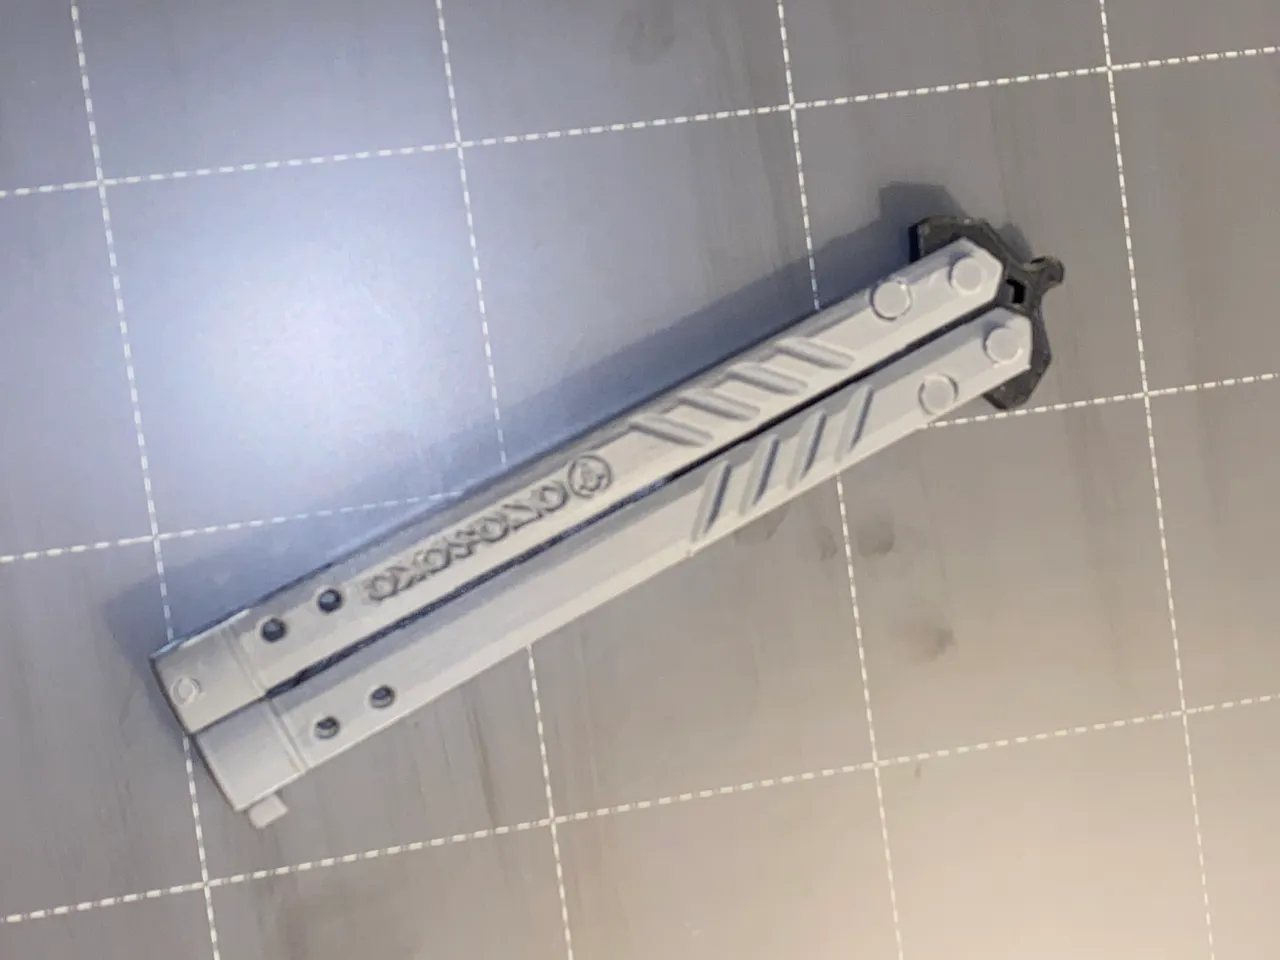 Fully Printable V2 Balisong Butterfly Knife - Complete with Fully Printable  Hardware and Locking Retention System by Night Raid, Download free STL  model